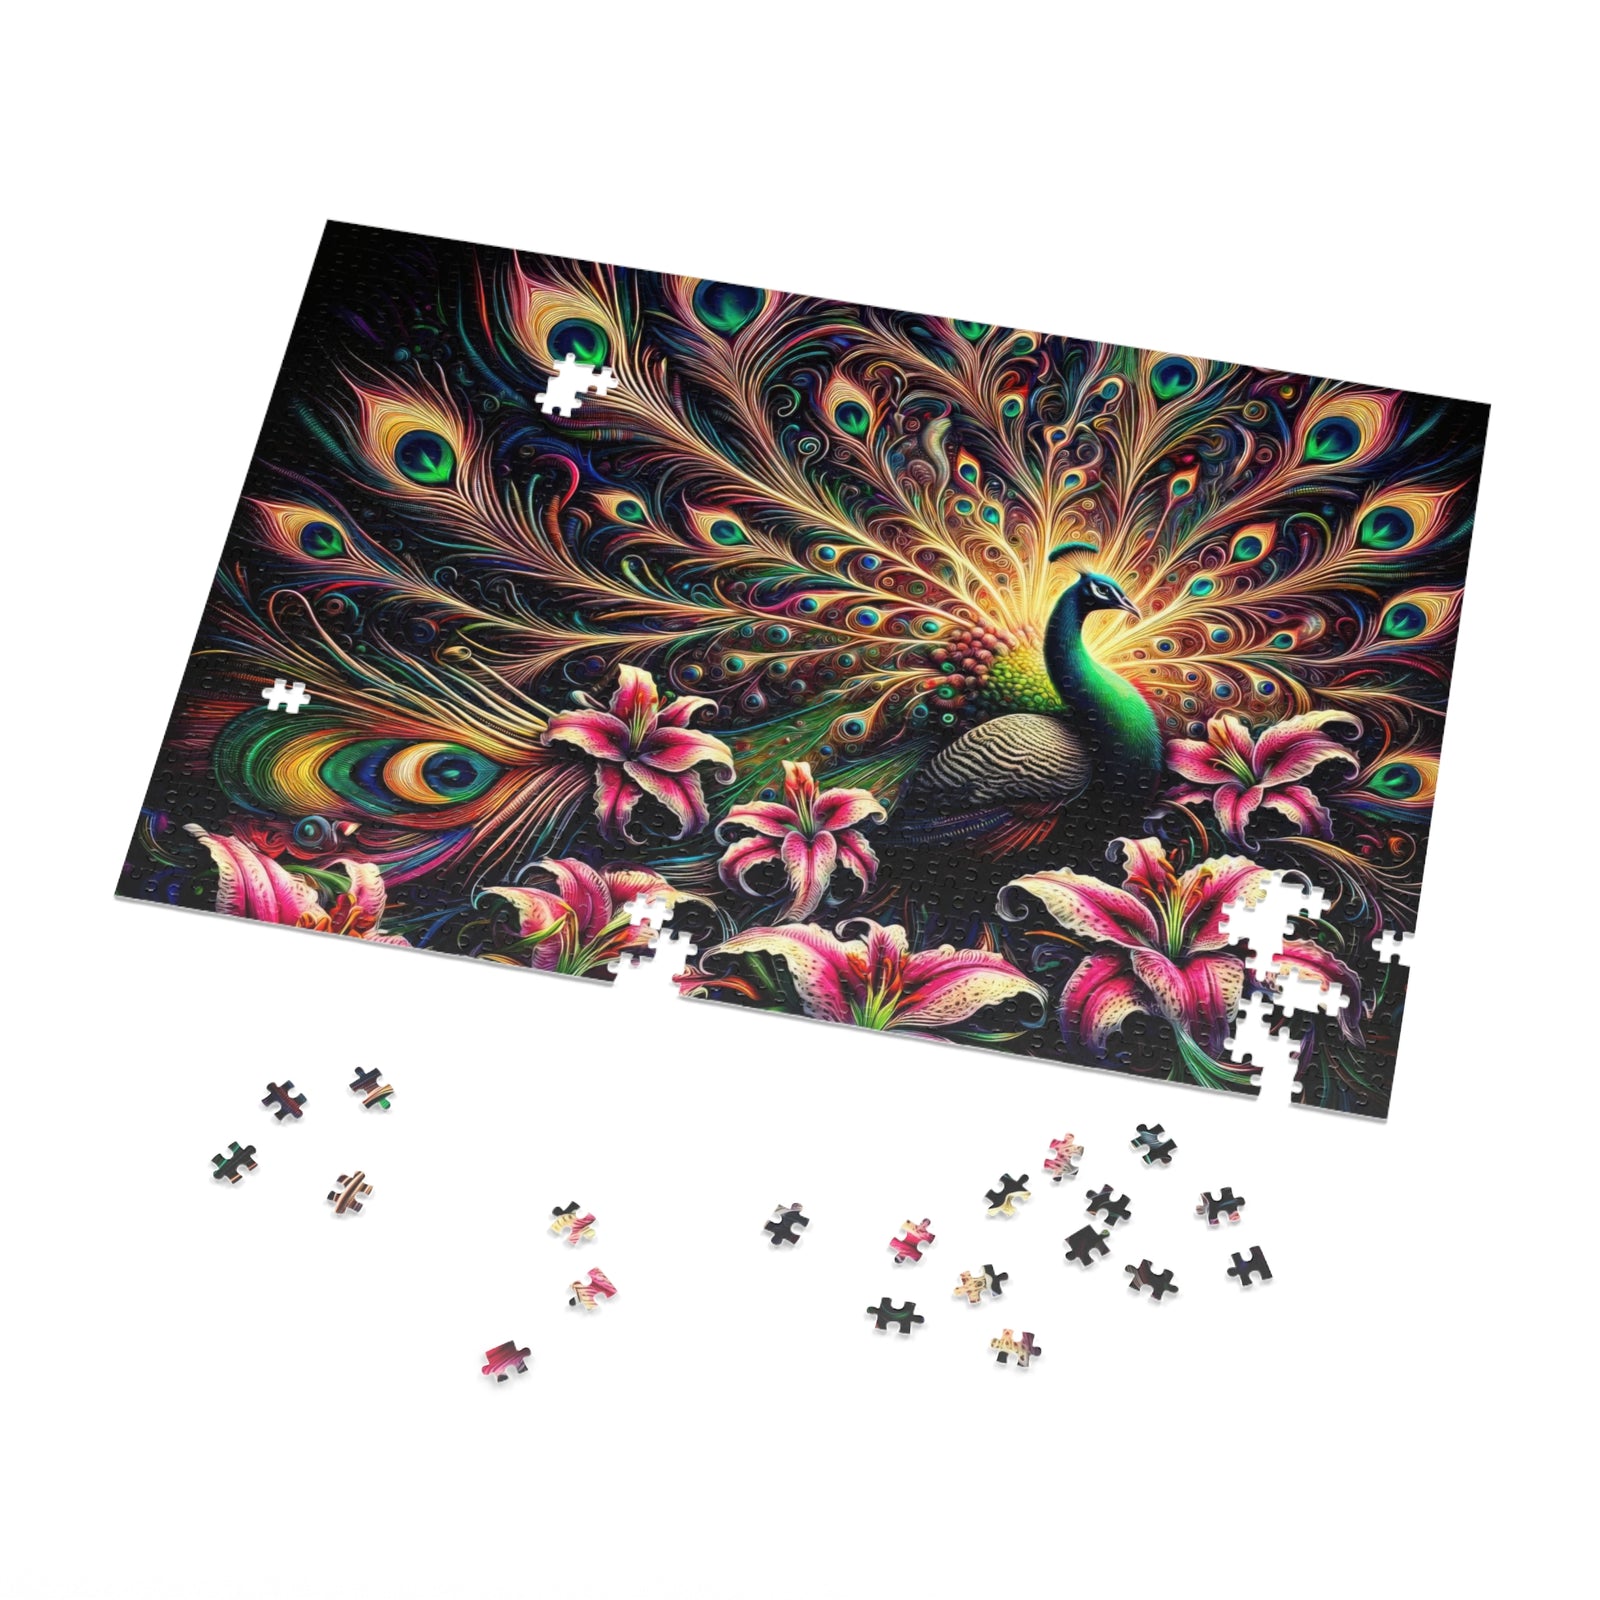 The Luminous Dance of the Peacock Jigsaw Puzzle